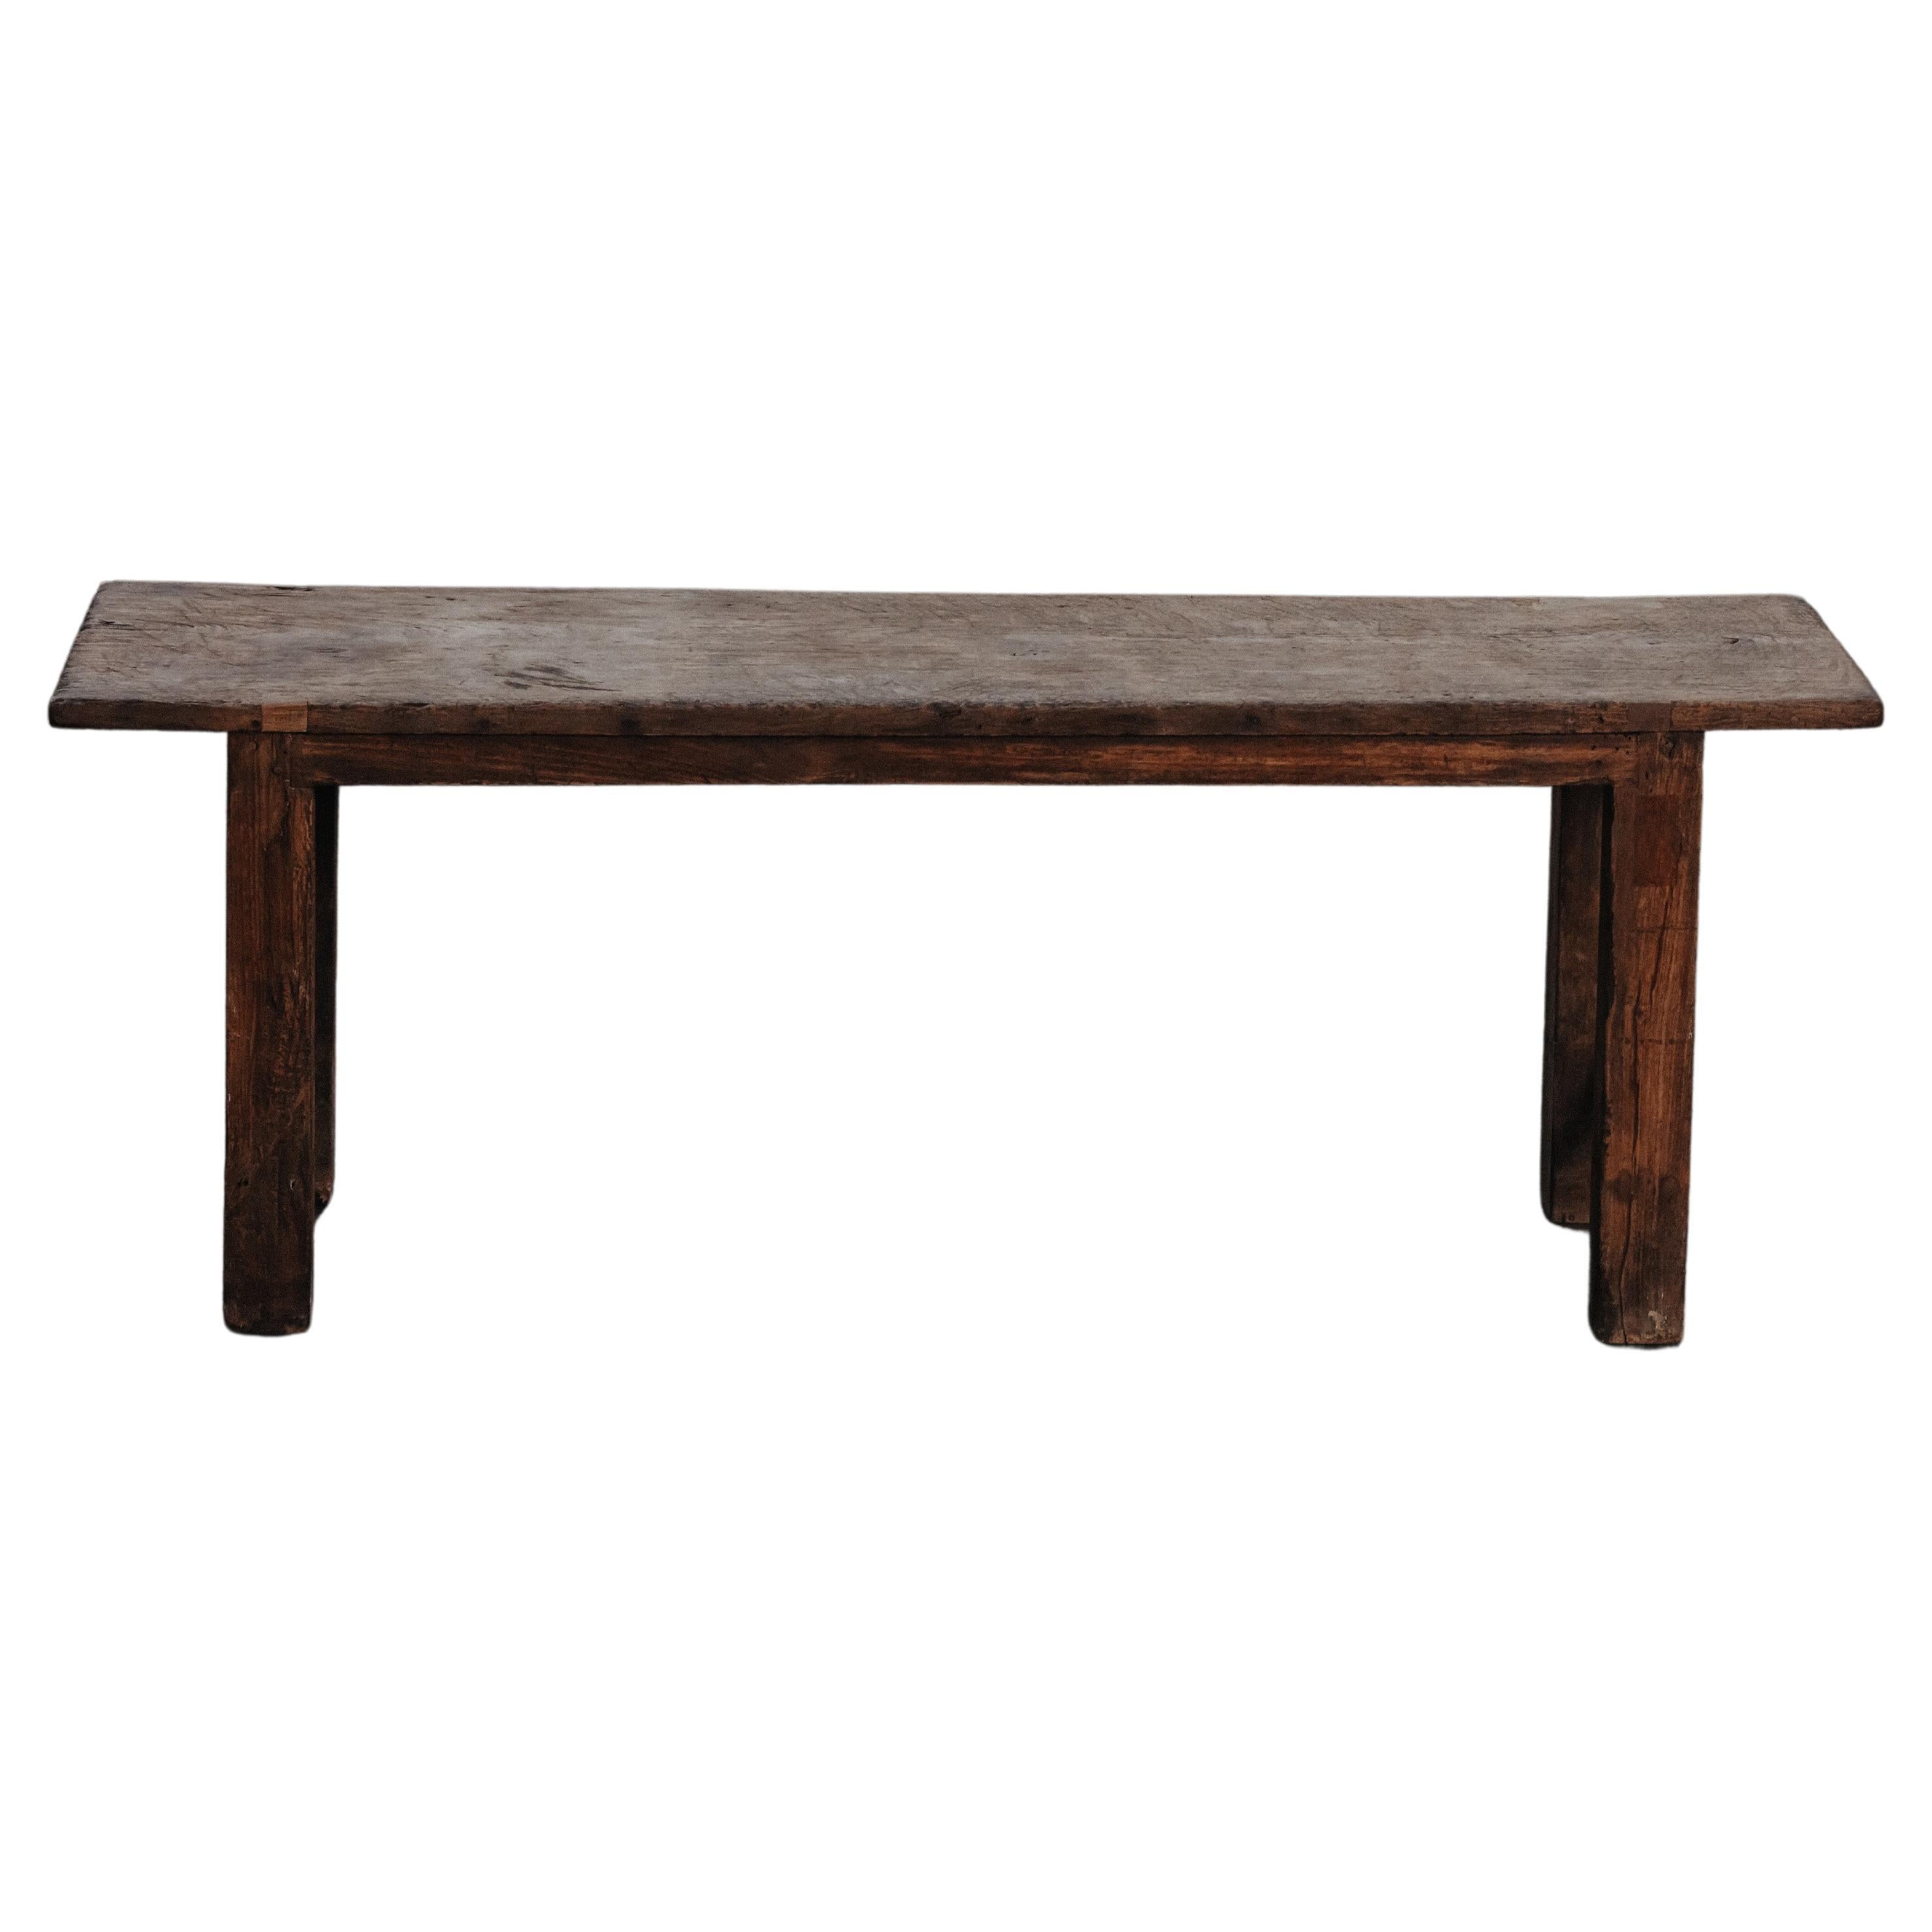 Primitive Oak Work Console Table From France, Circa 1900